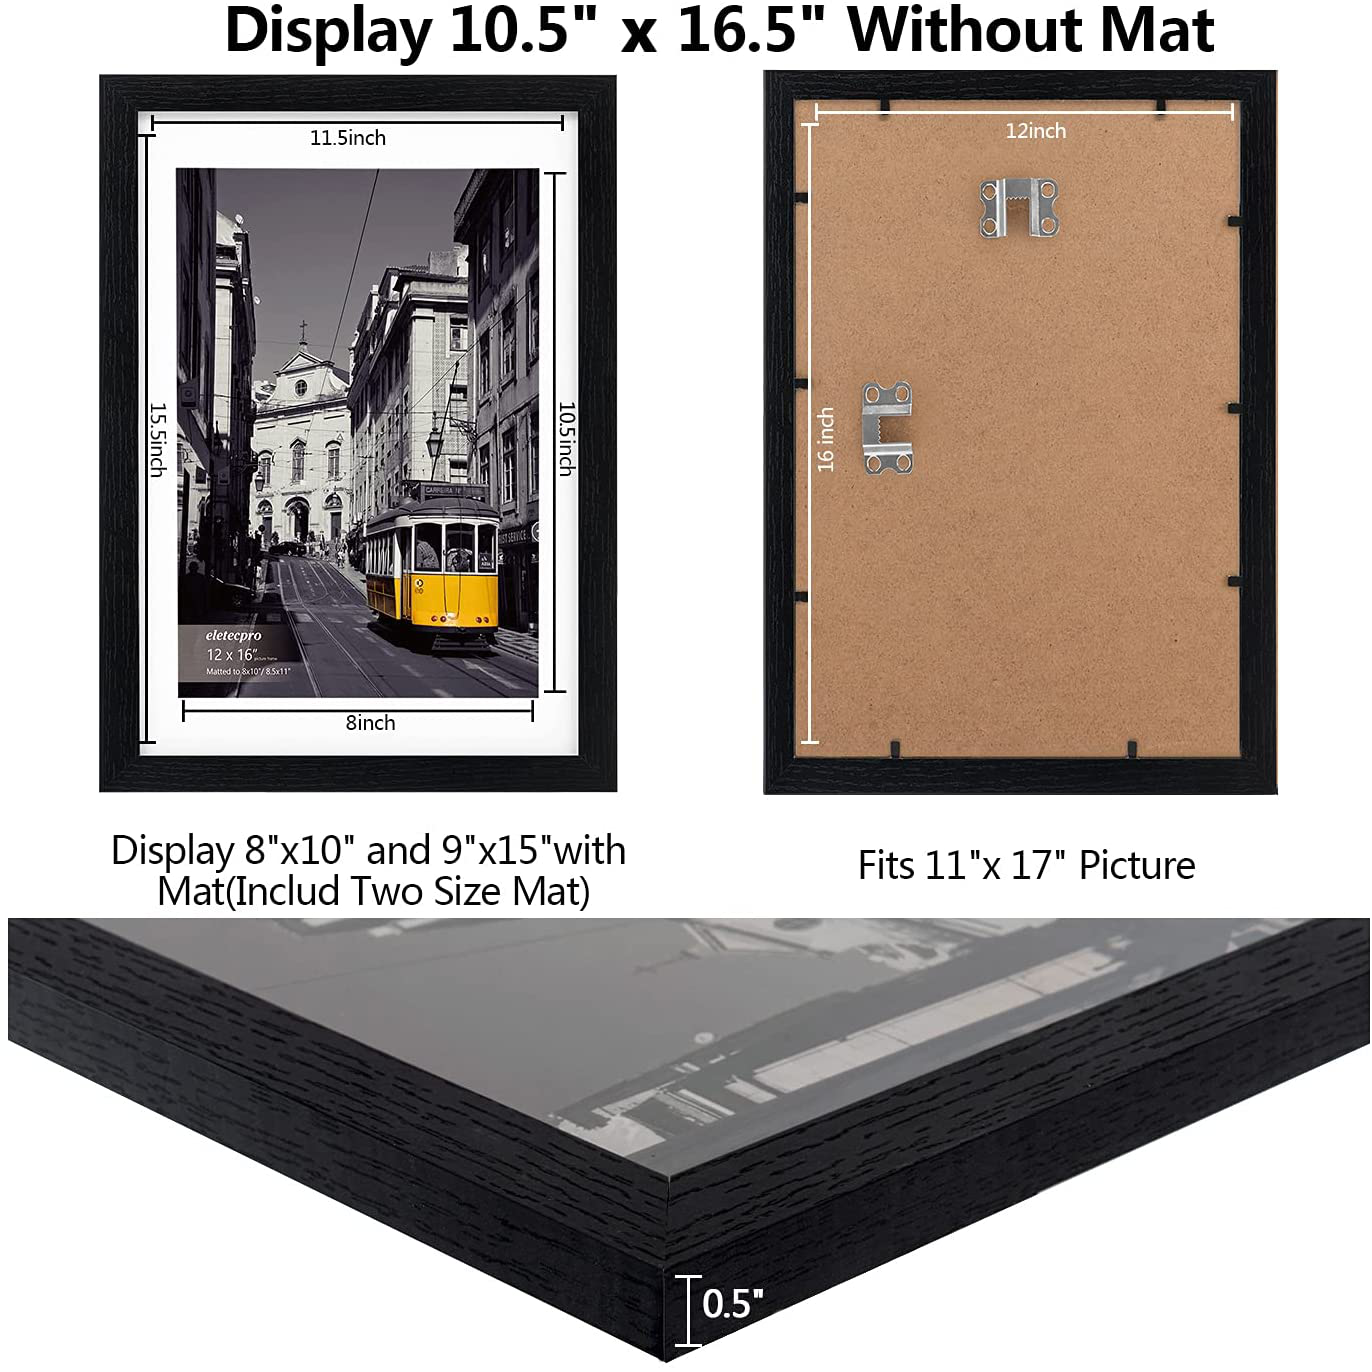 eletecpro 8x10 Picture Frames Set of 5, Display 4x6 or 5x7 Photo Frame with Mat or 8x10 Without Mat, Wall Gallery Photo Frames, Table Top Display or Wall Mounting